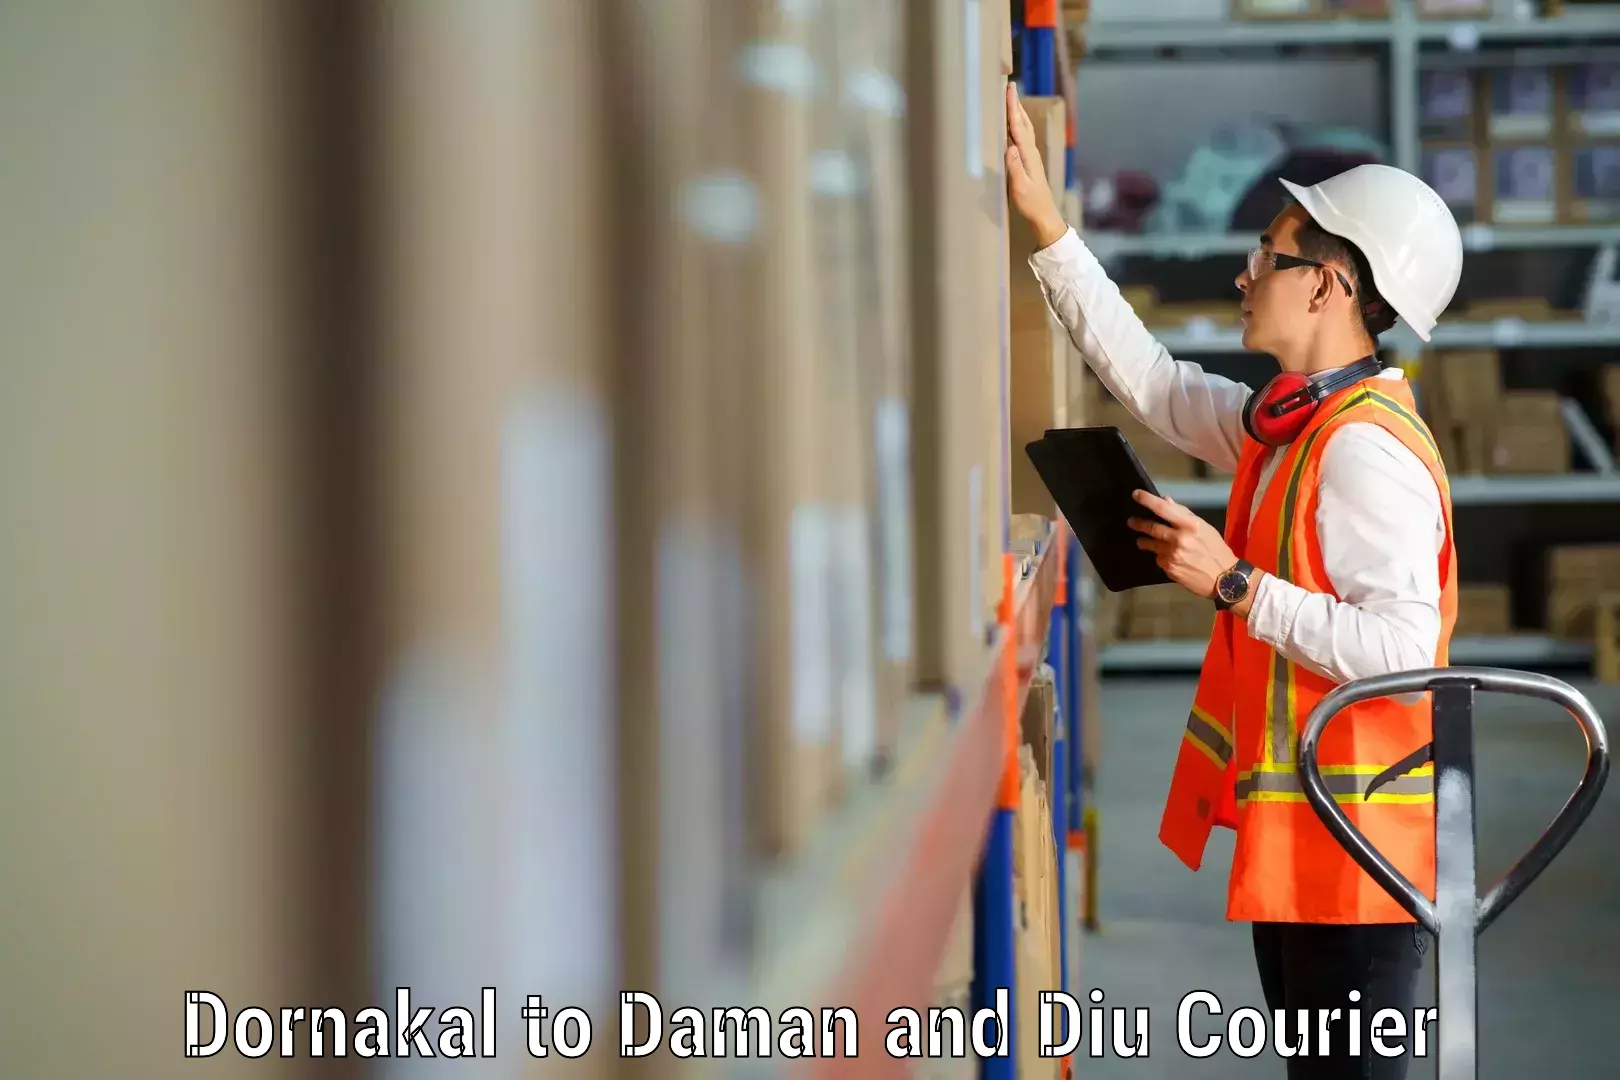 Smooth relocation services in Dornakal to Diu